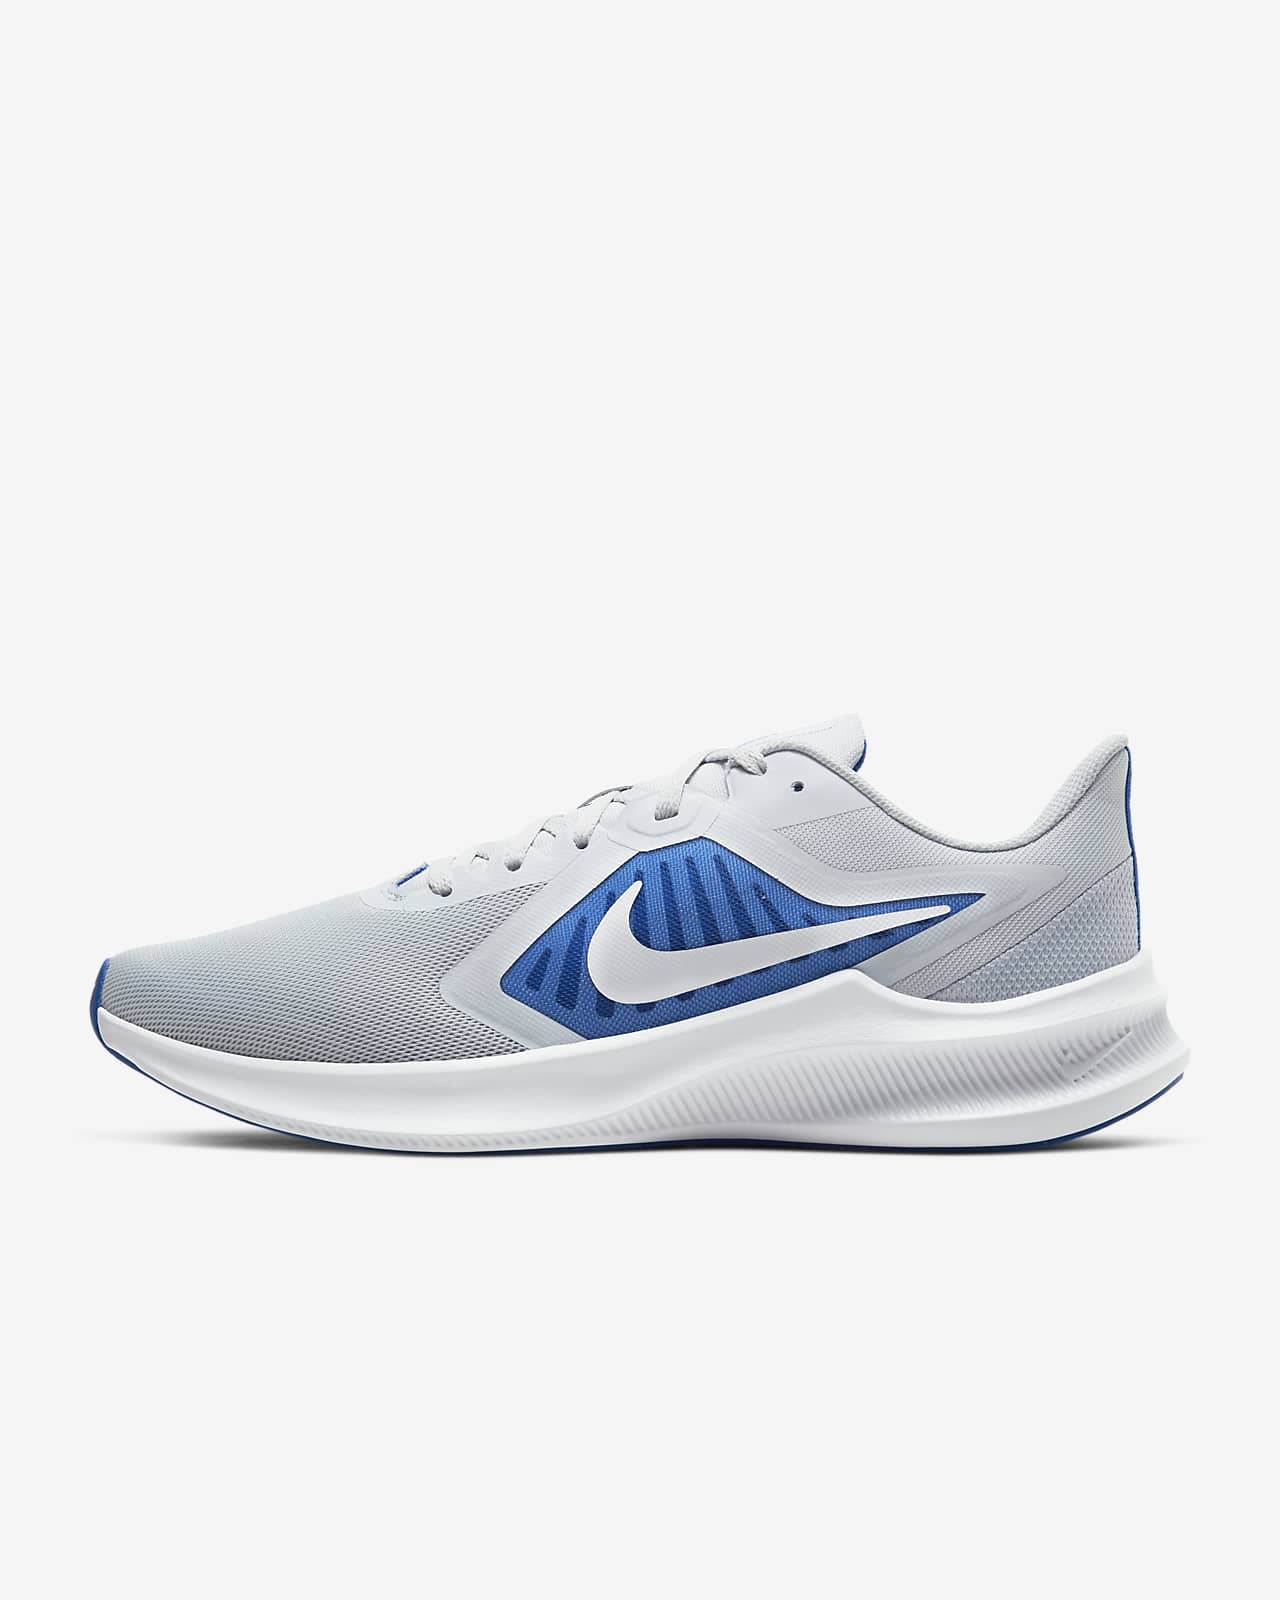 nike downshifter 10 men's running shoes stores